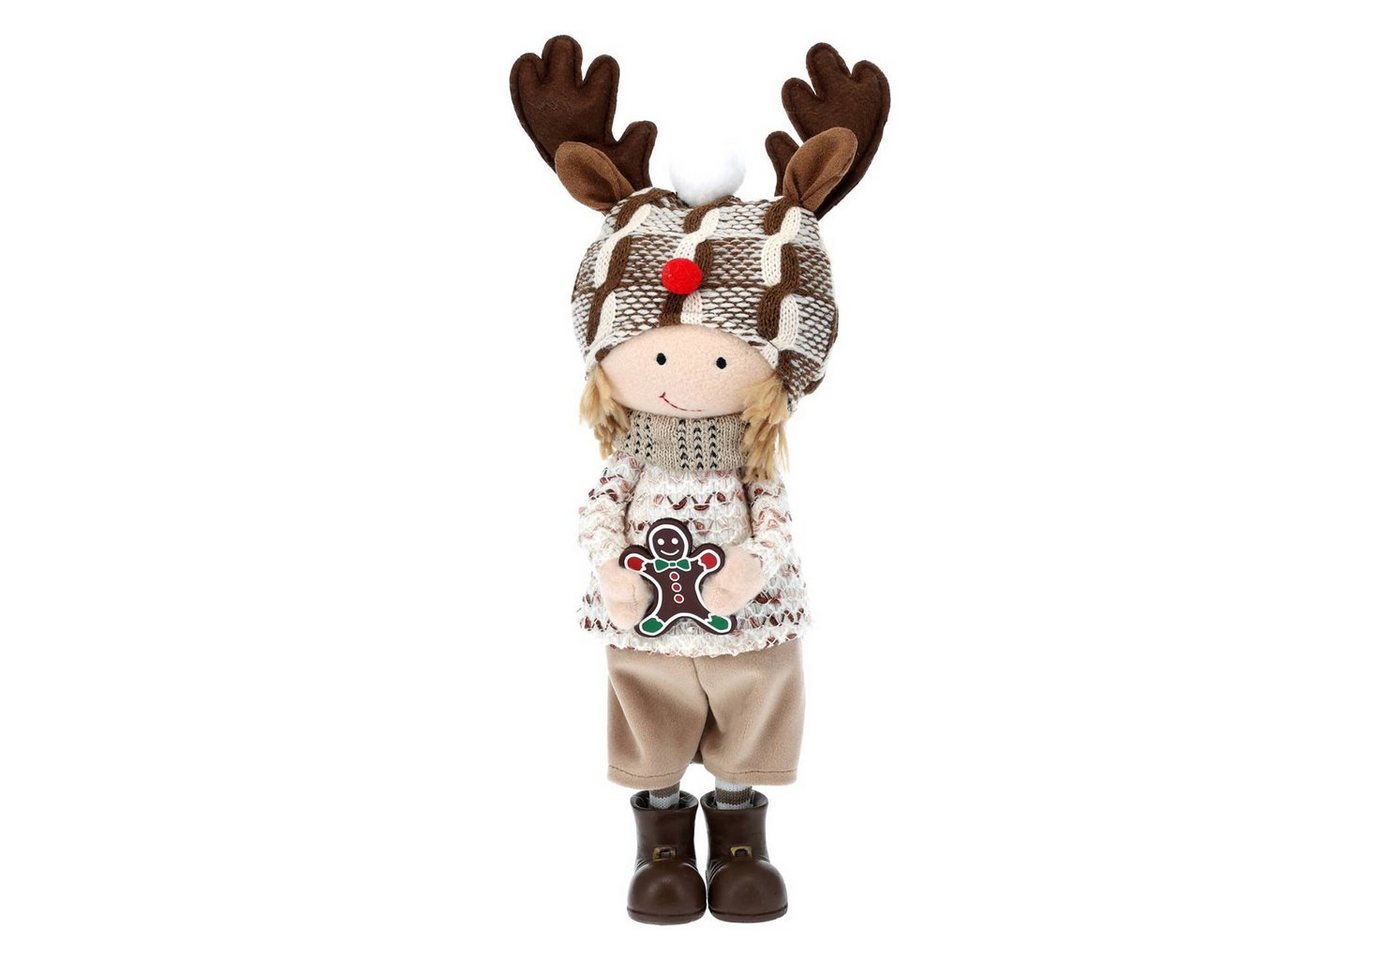 Home & styling collection Weihnachtsfigur Weihnachtsfigur von Home & styling collection